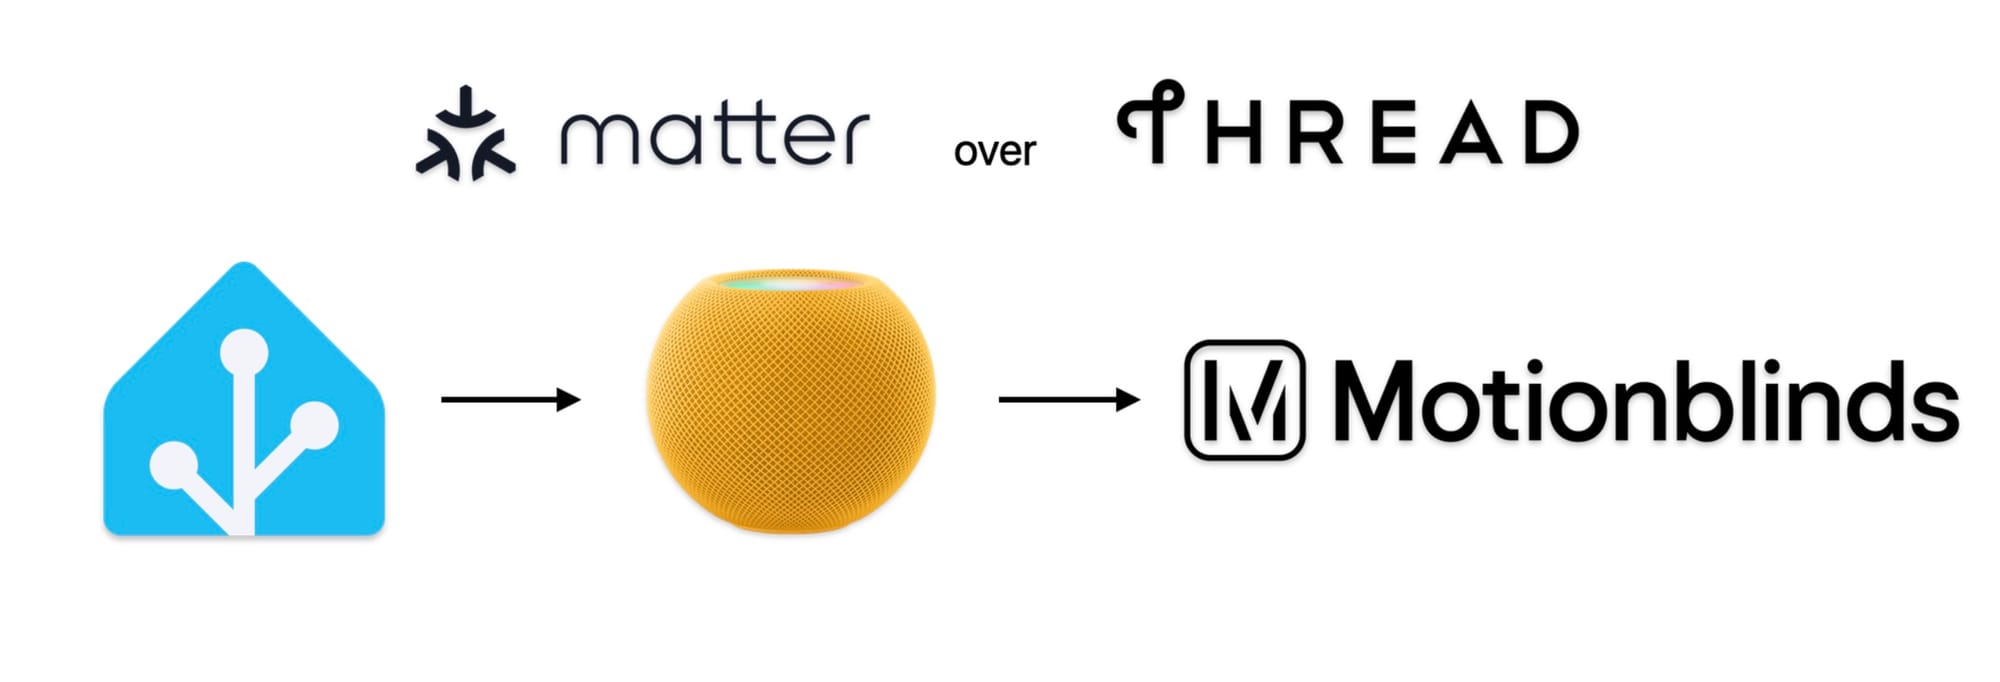 A flow diagram showing the Home Assistant logo, with an arrow to a HomePod Mini, with an arrow to Motionblinds.